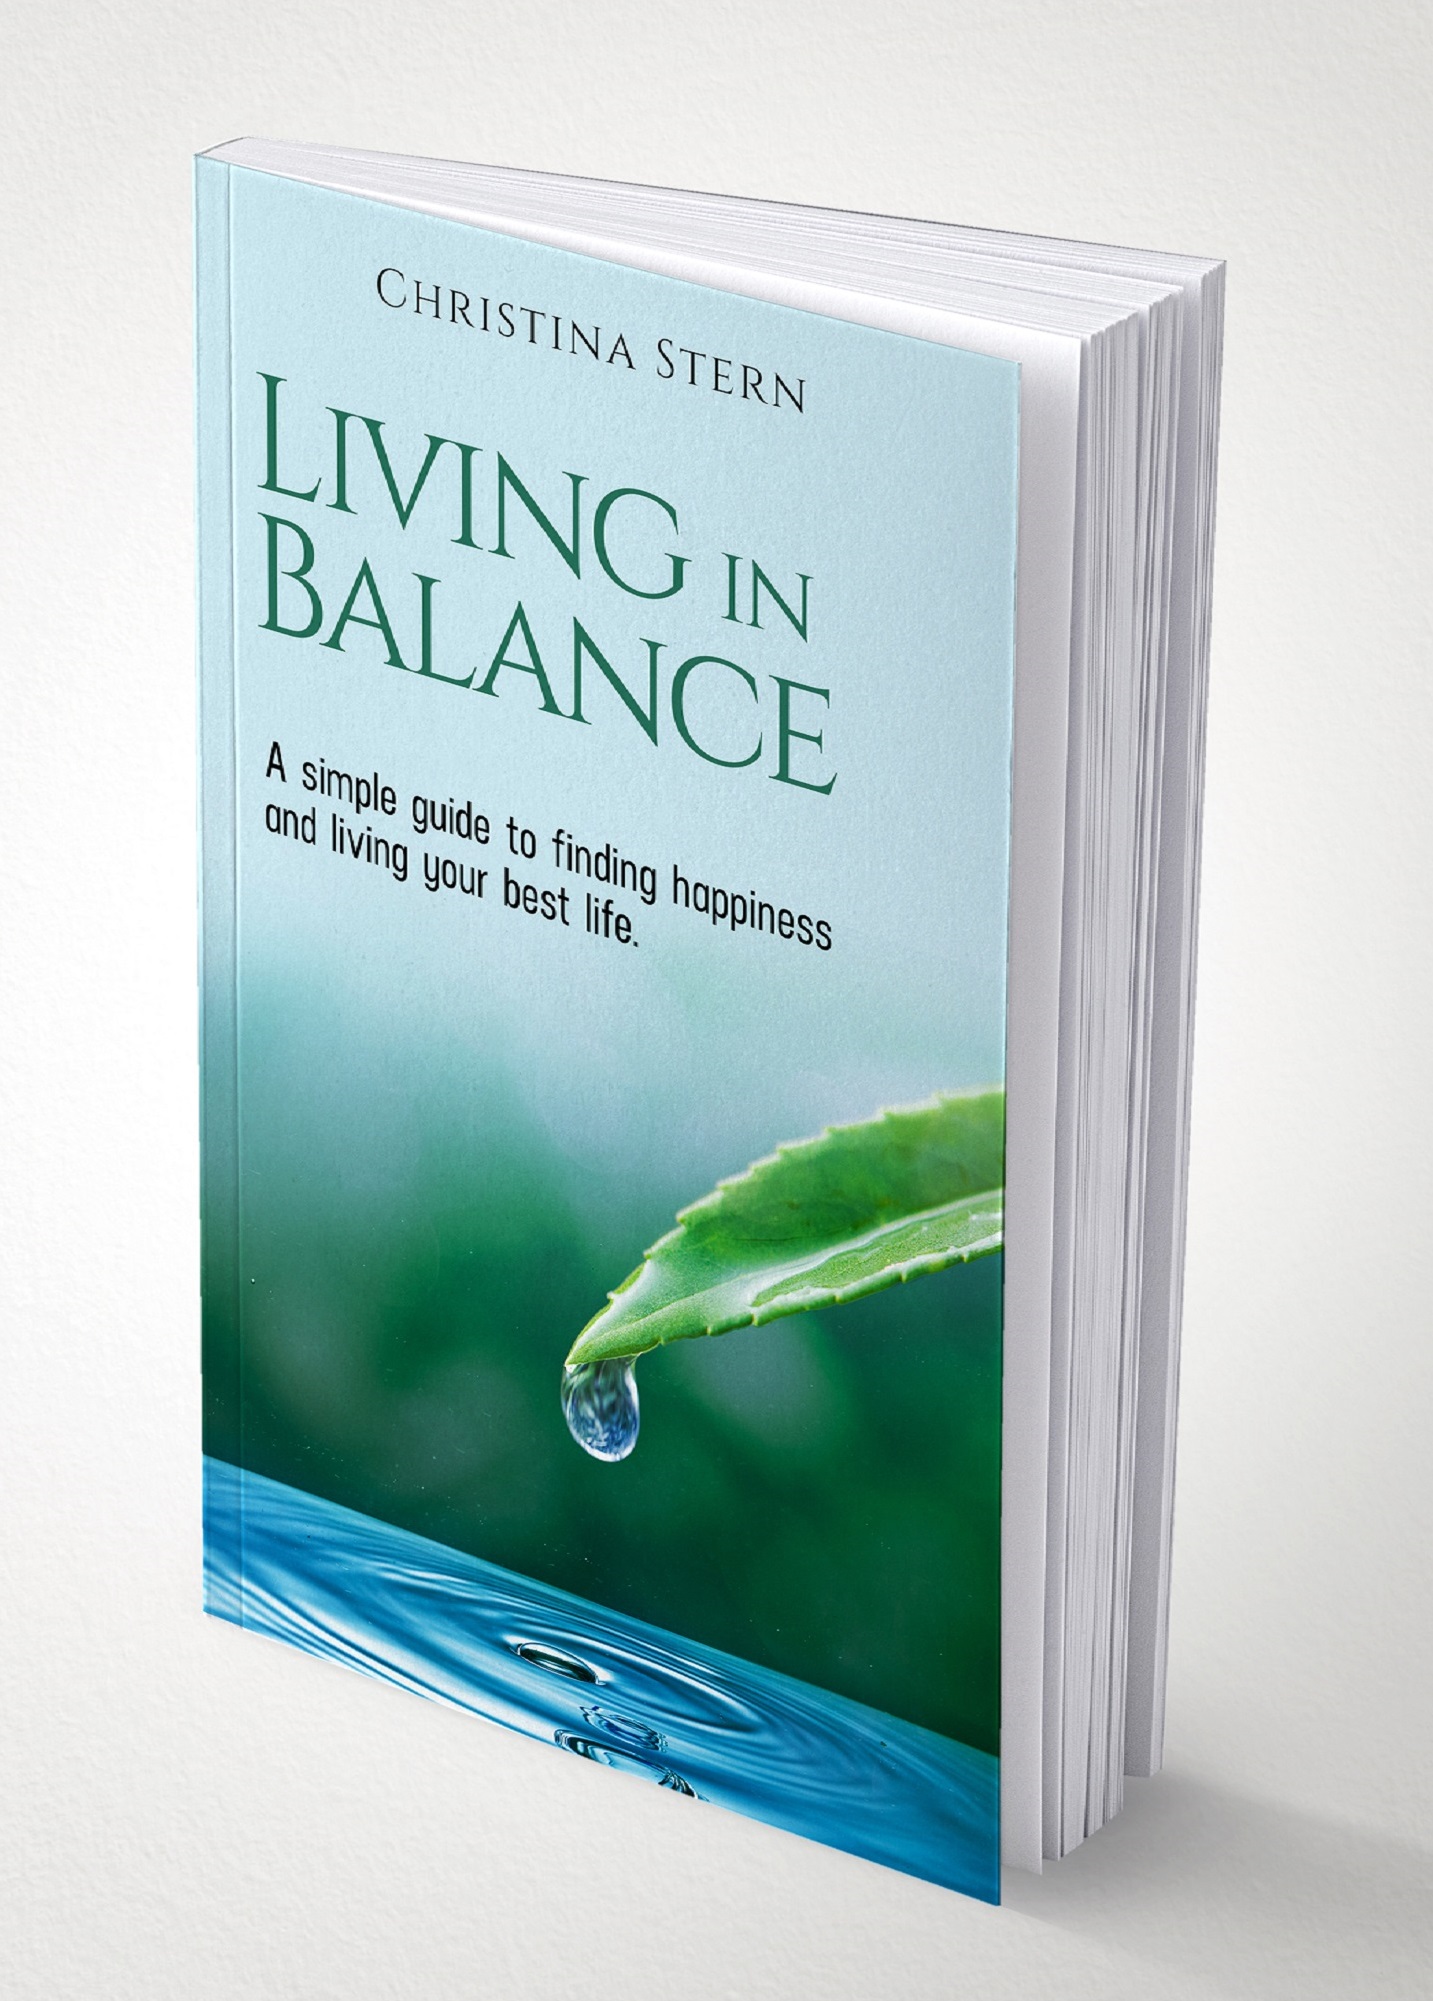 Christina Stern gives a simple guide to finding happiness and living your best life in her new book "Living in Balance"